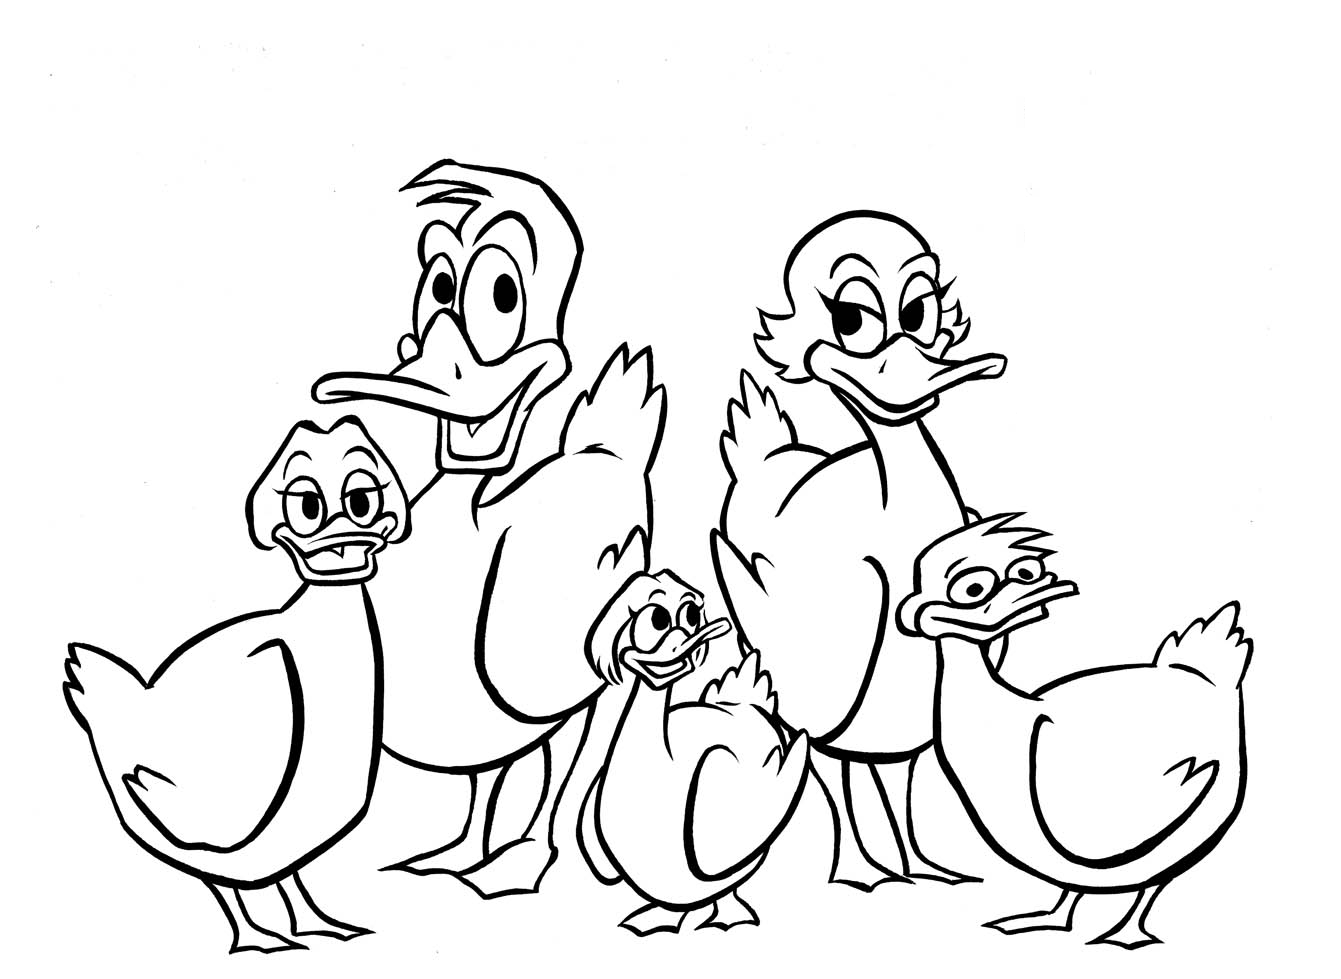 Cute Duck Coloring Sheets | Coloring Online